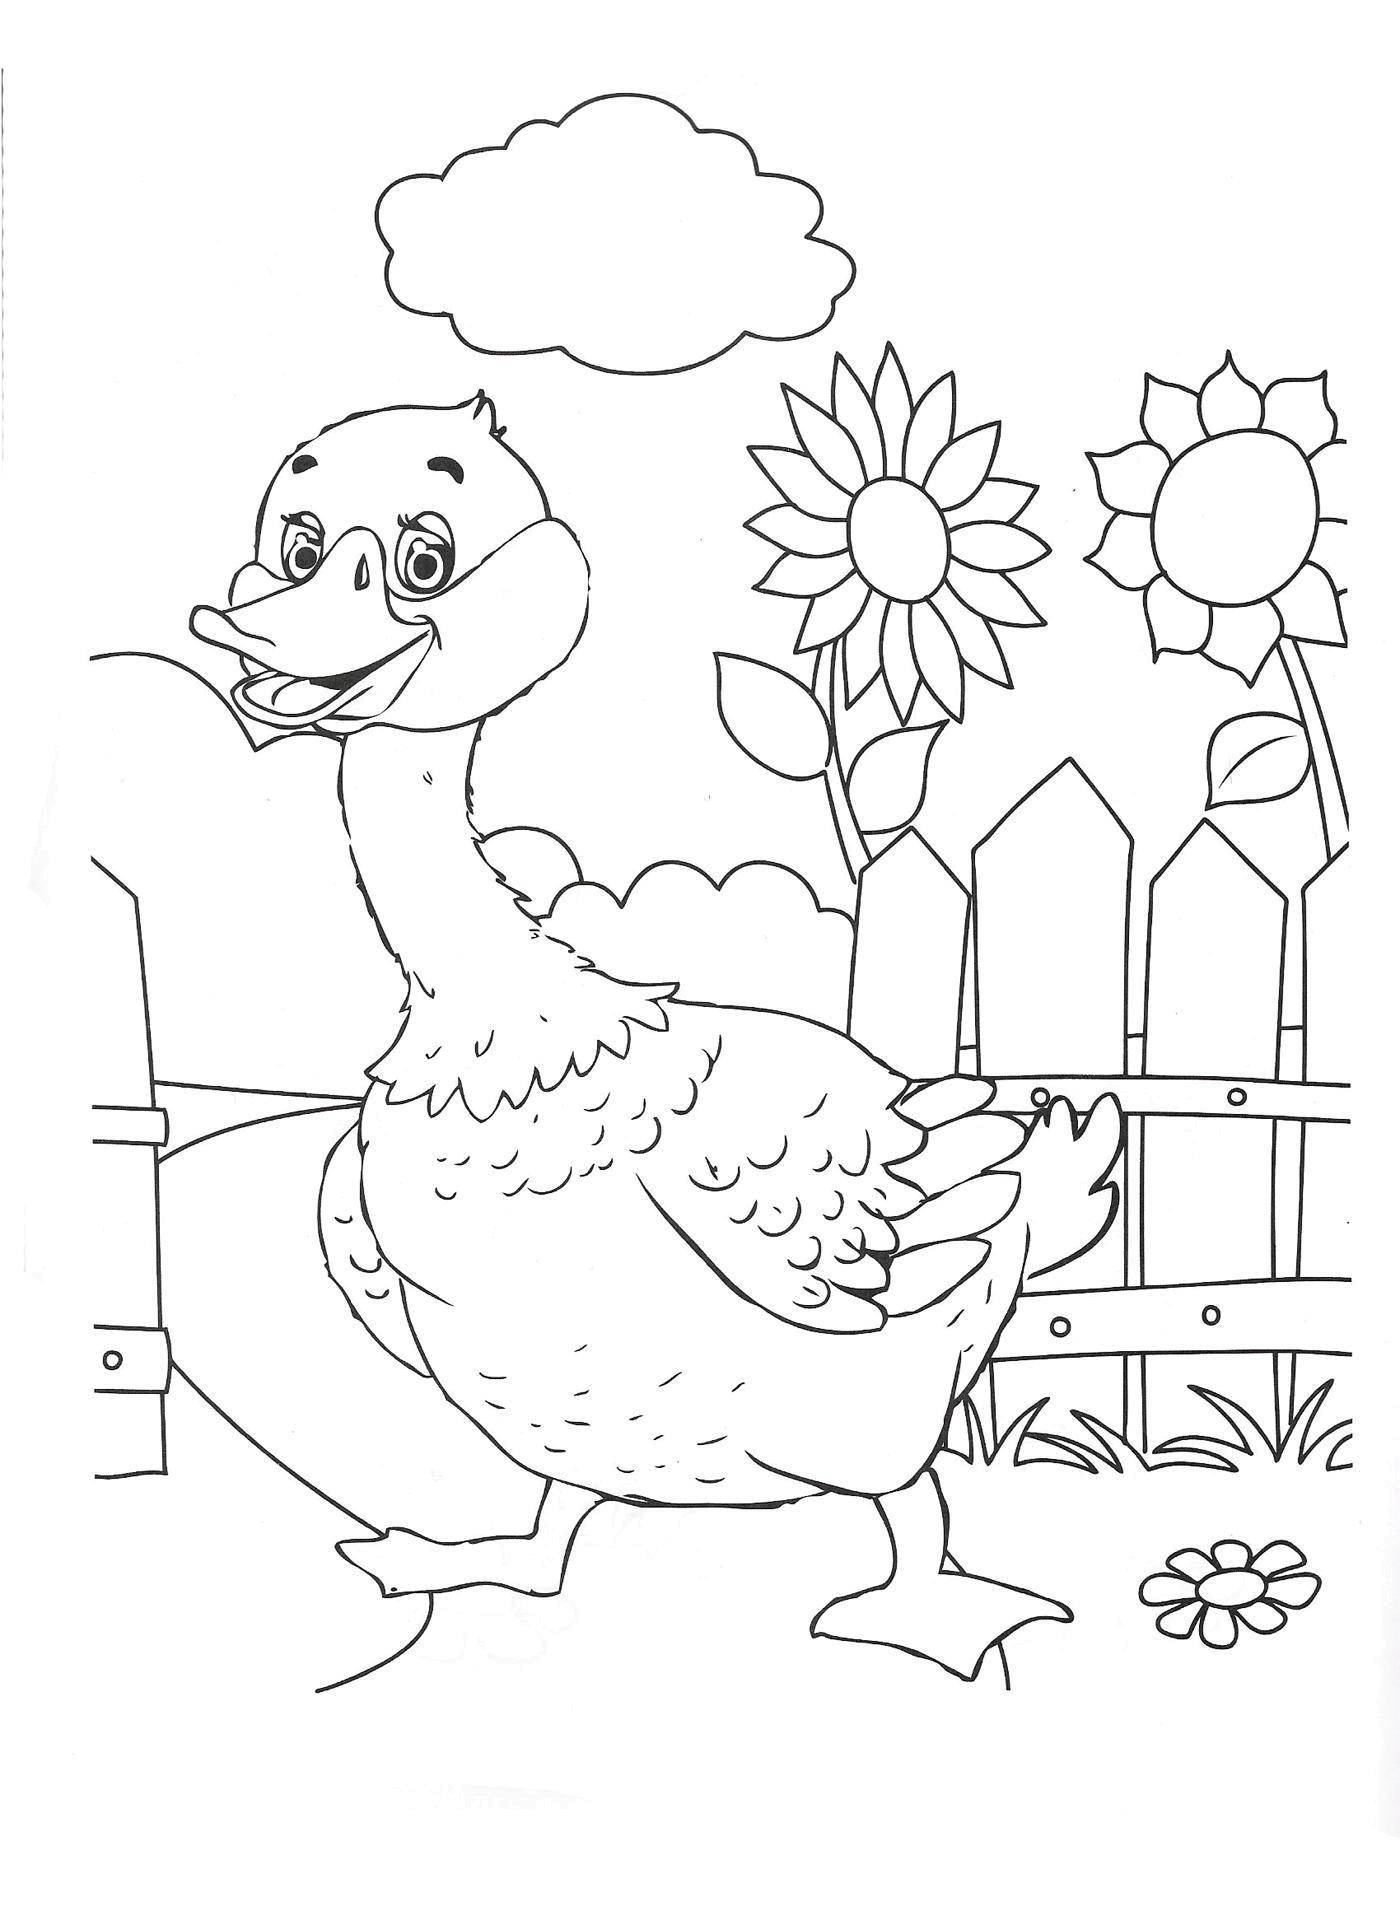 Coloring Ducks in the yard. Category birds. Tags:  Poultry, duck.